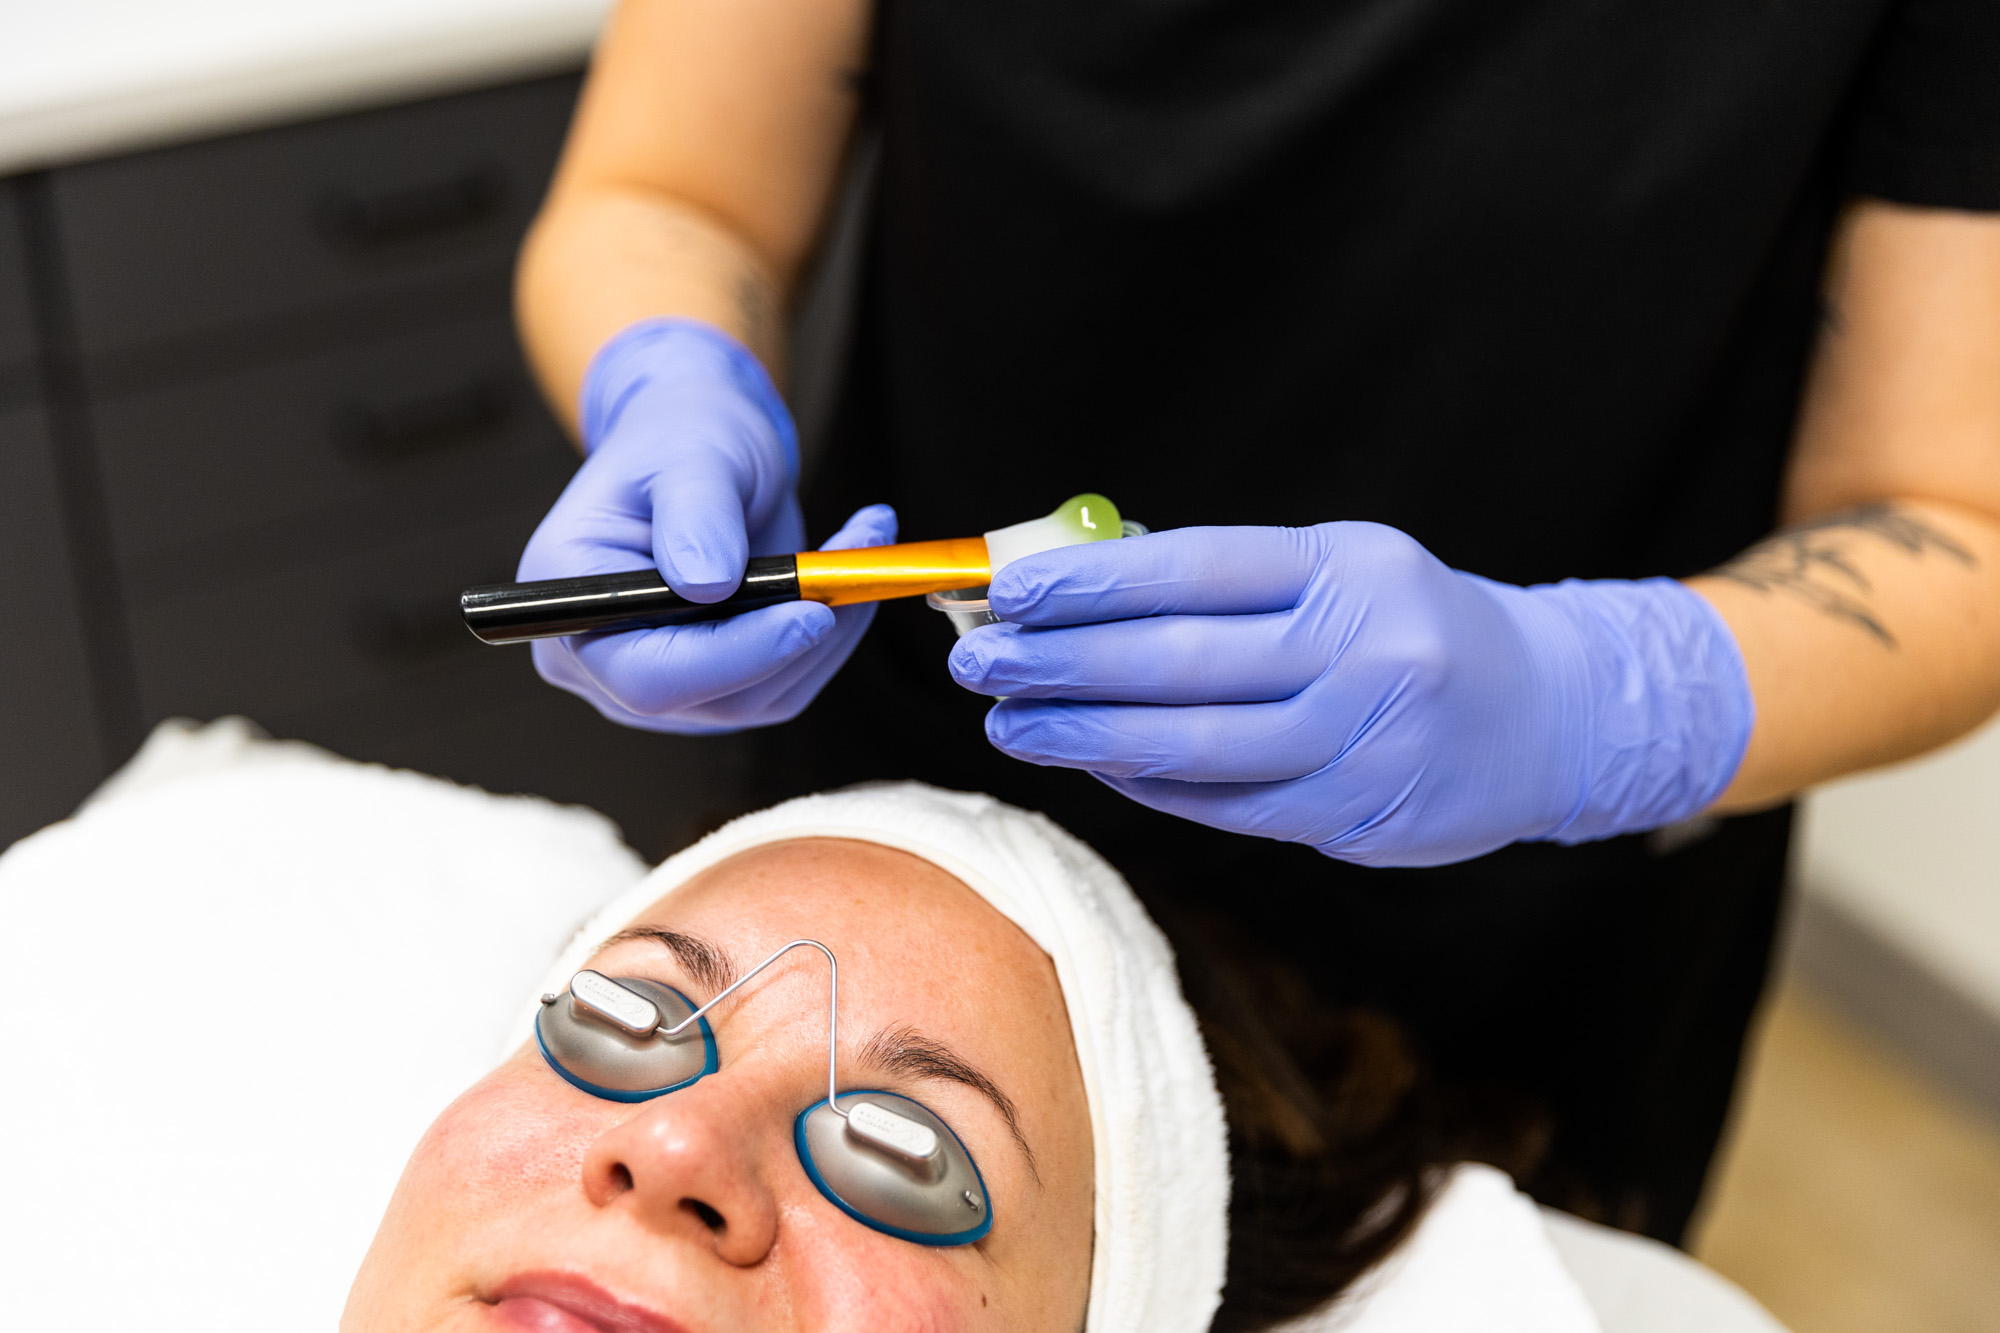 A Kansas City Skin and Cancer Center employee dips the applicator tool back into the small cup of facial gel above a female client's forehead.